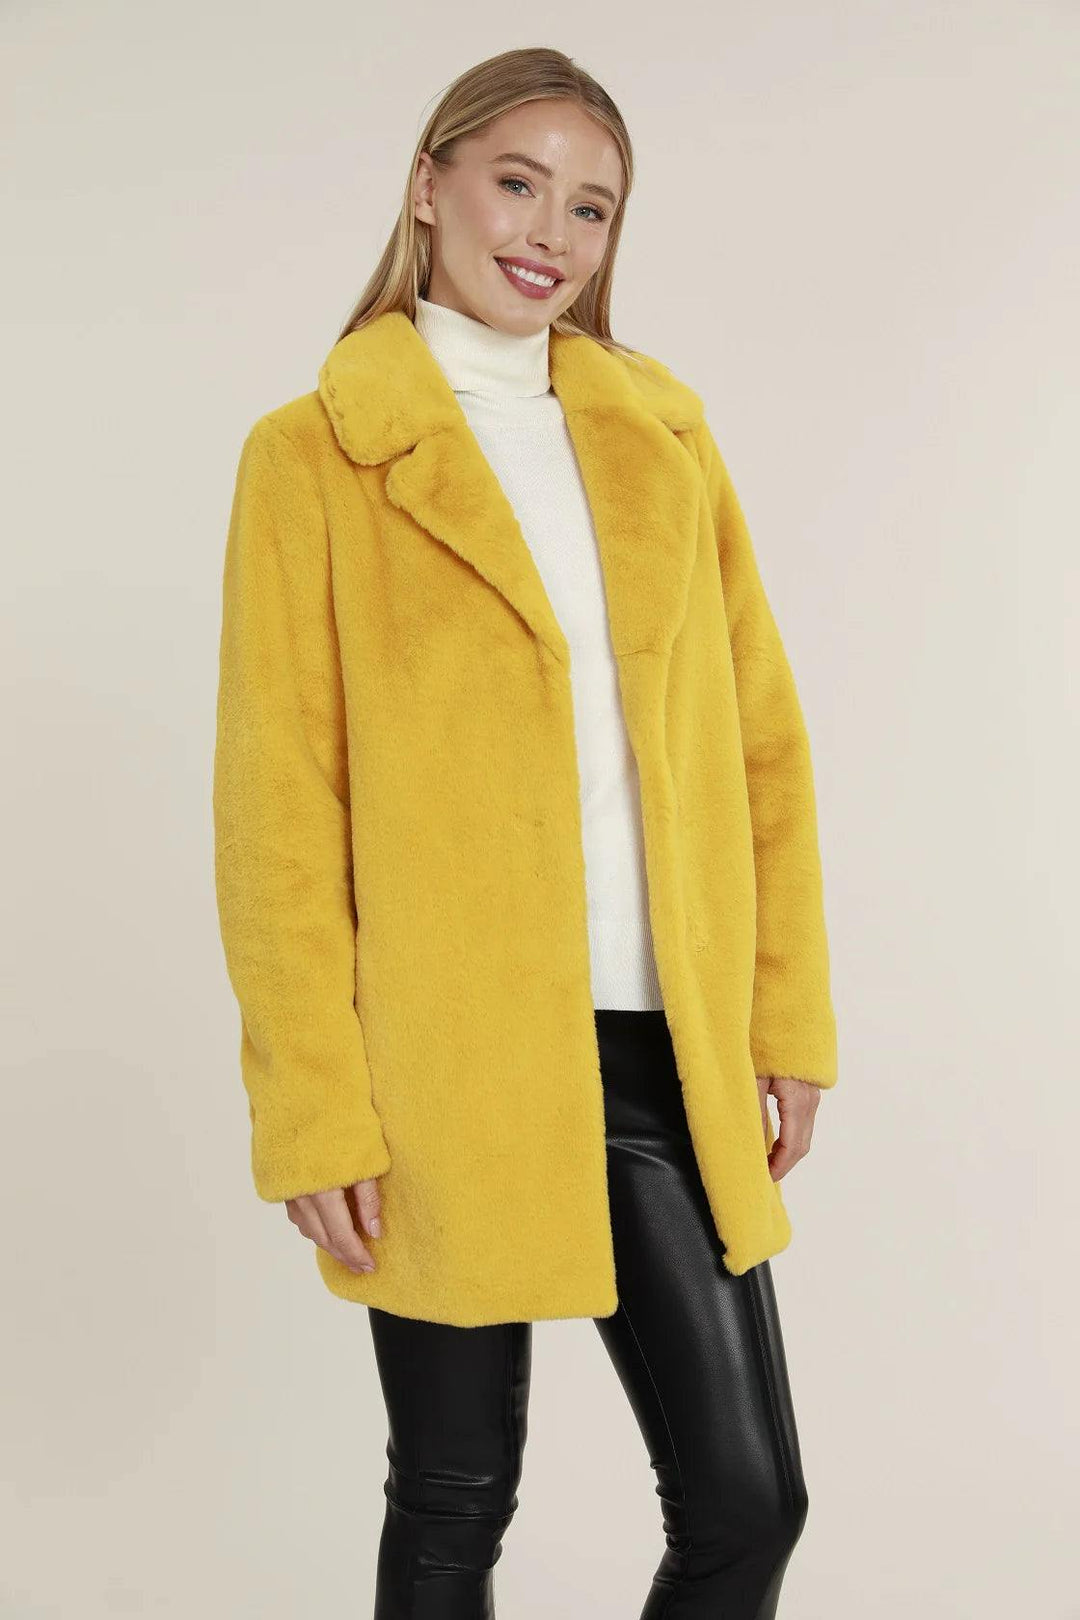 faux fur calf length coat yellow womens gift holiday boutiqueDolce Cabo